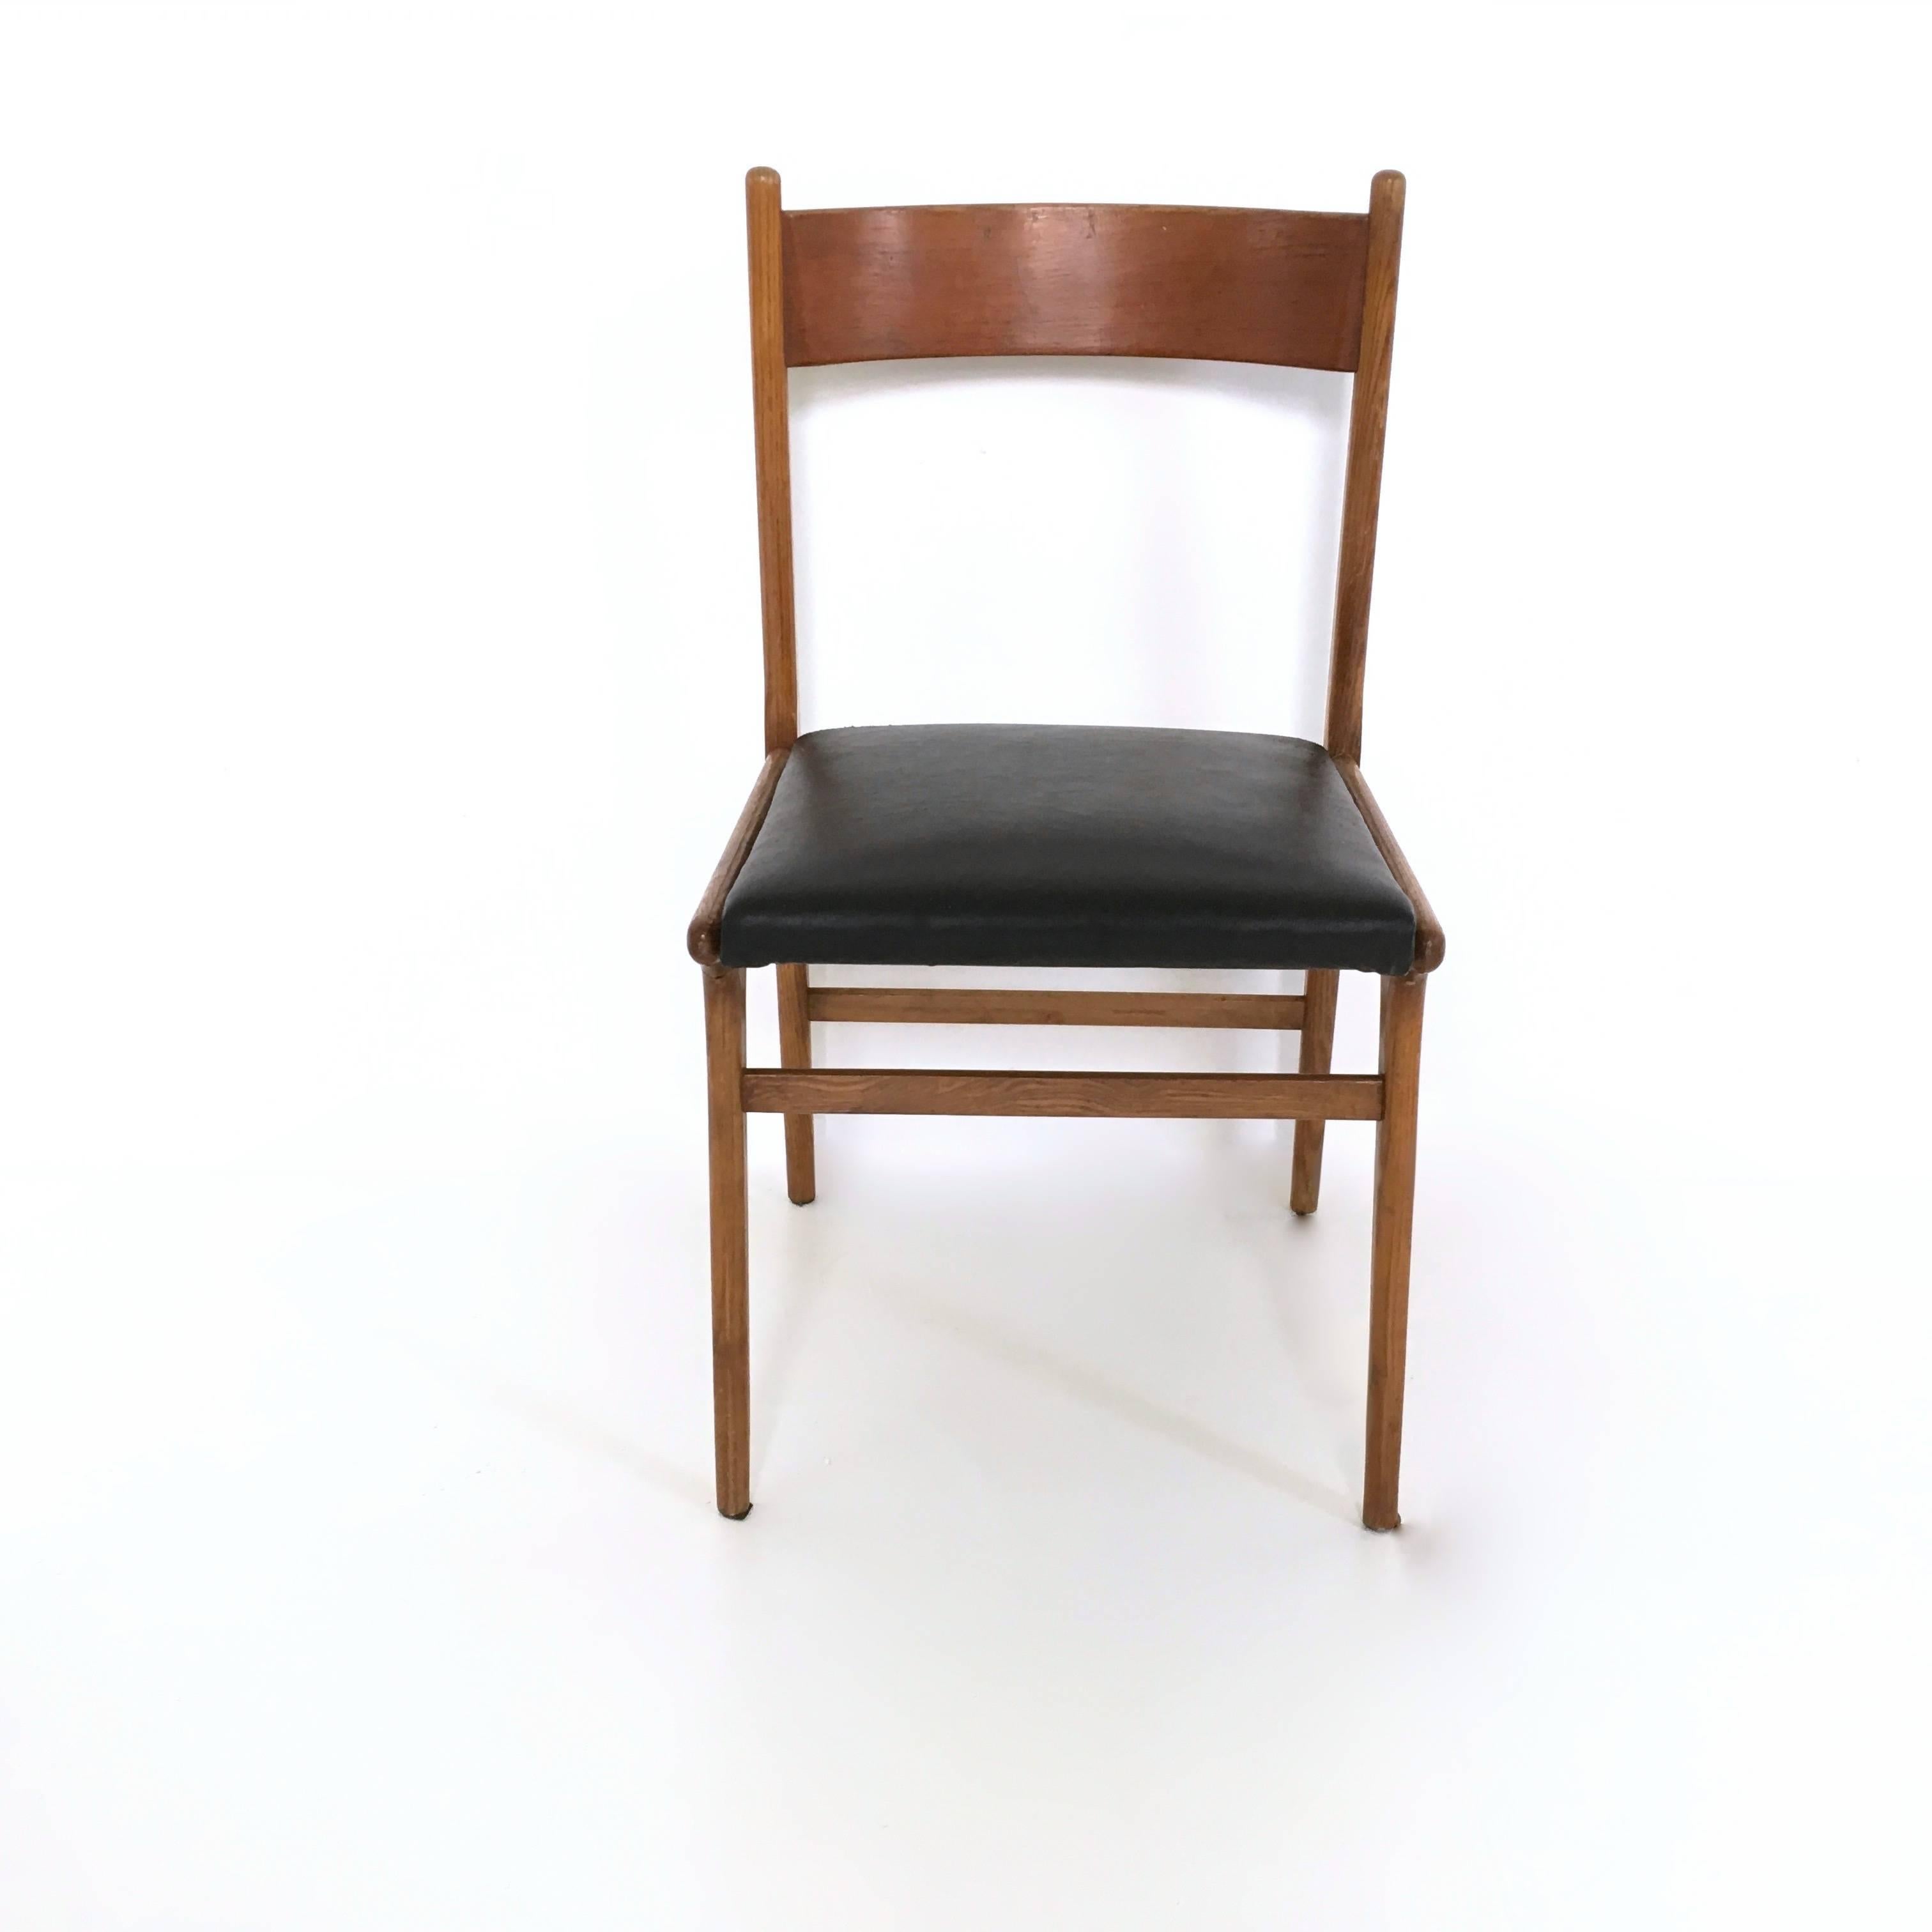 This set of four dining chairs is made from walnut and skai.